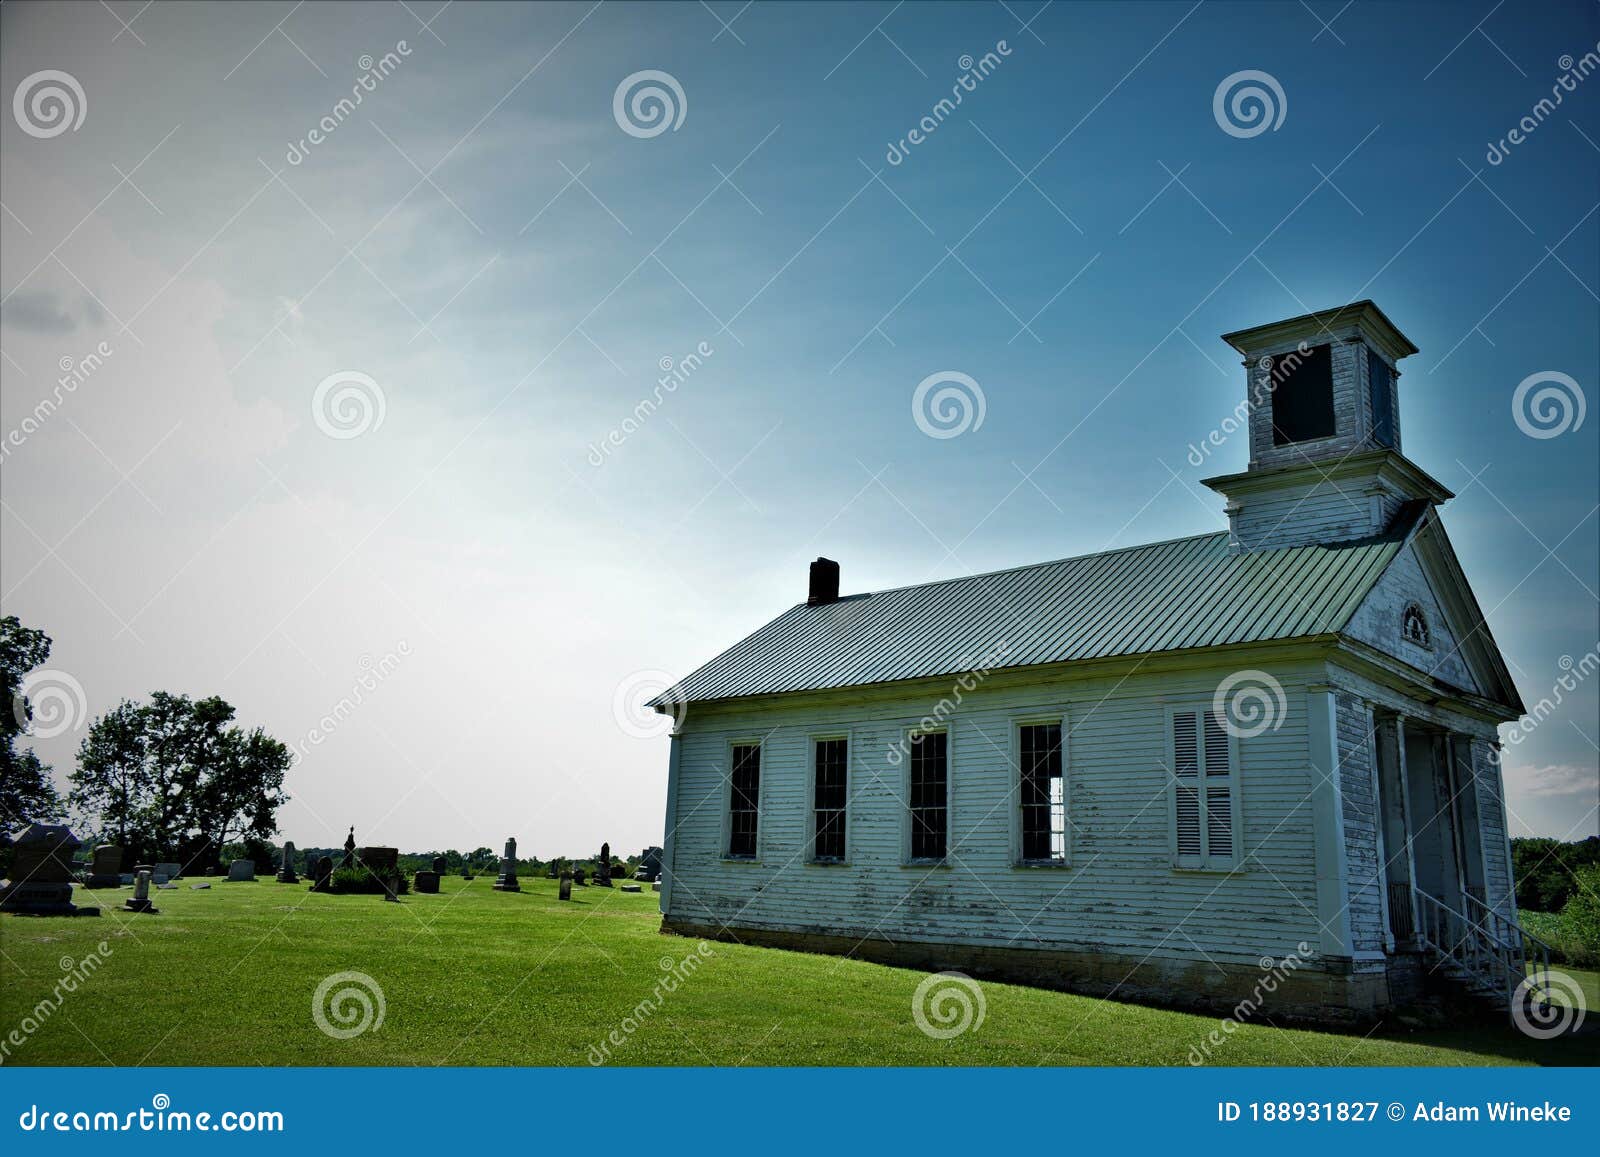 Mt. Zion 1871 PM Church Lancaster Wisconsin Stock Image